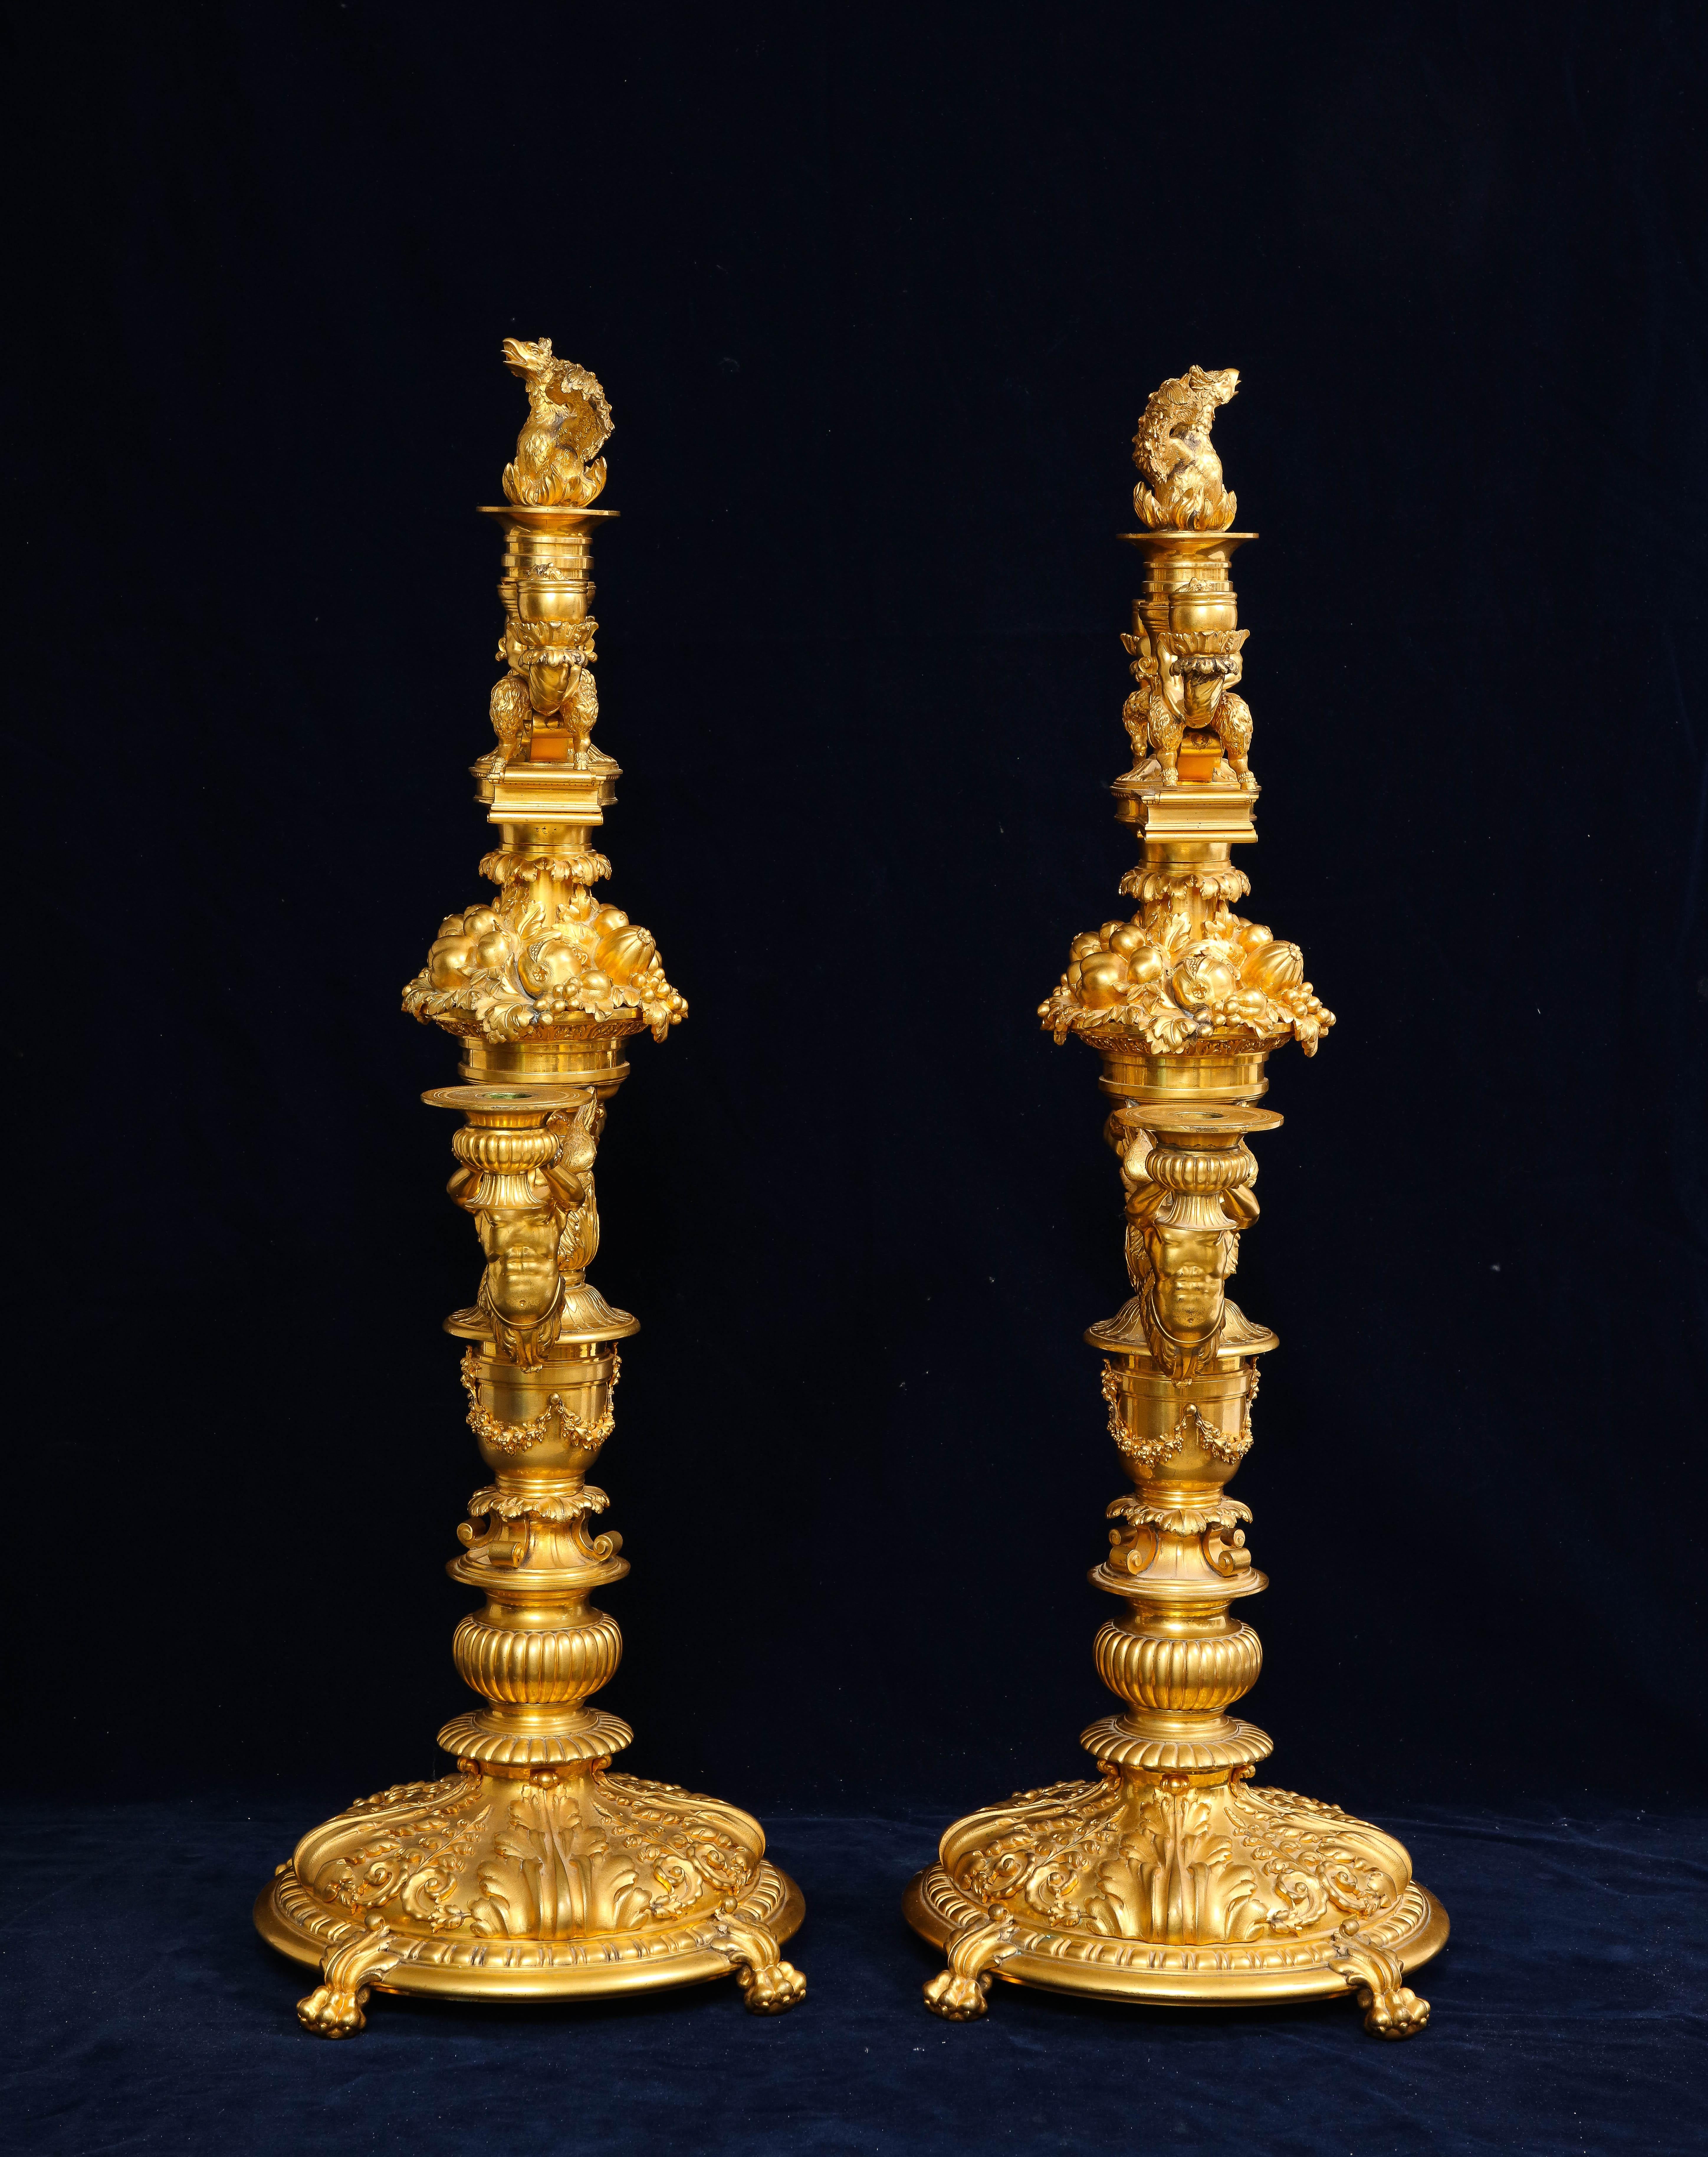 Bronze Marvelous Pair of 19th C. French Ormolu Four Arm Candelabras, Signed P. Canaux For Sale